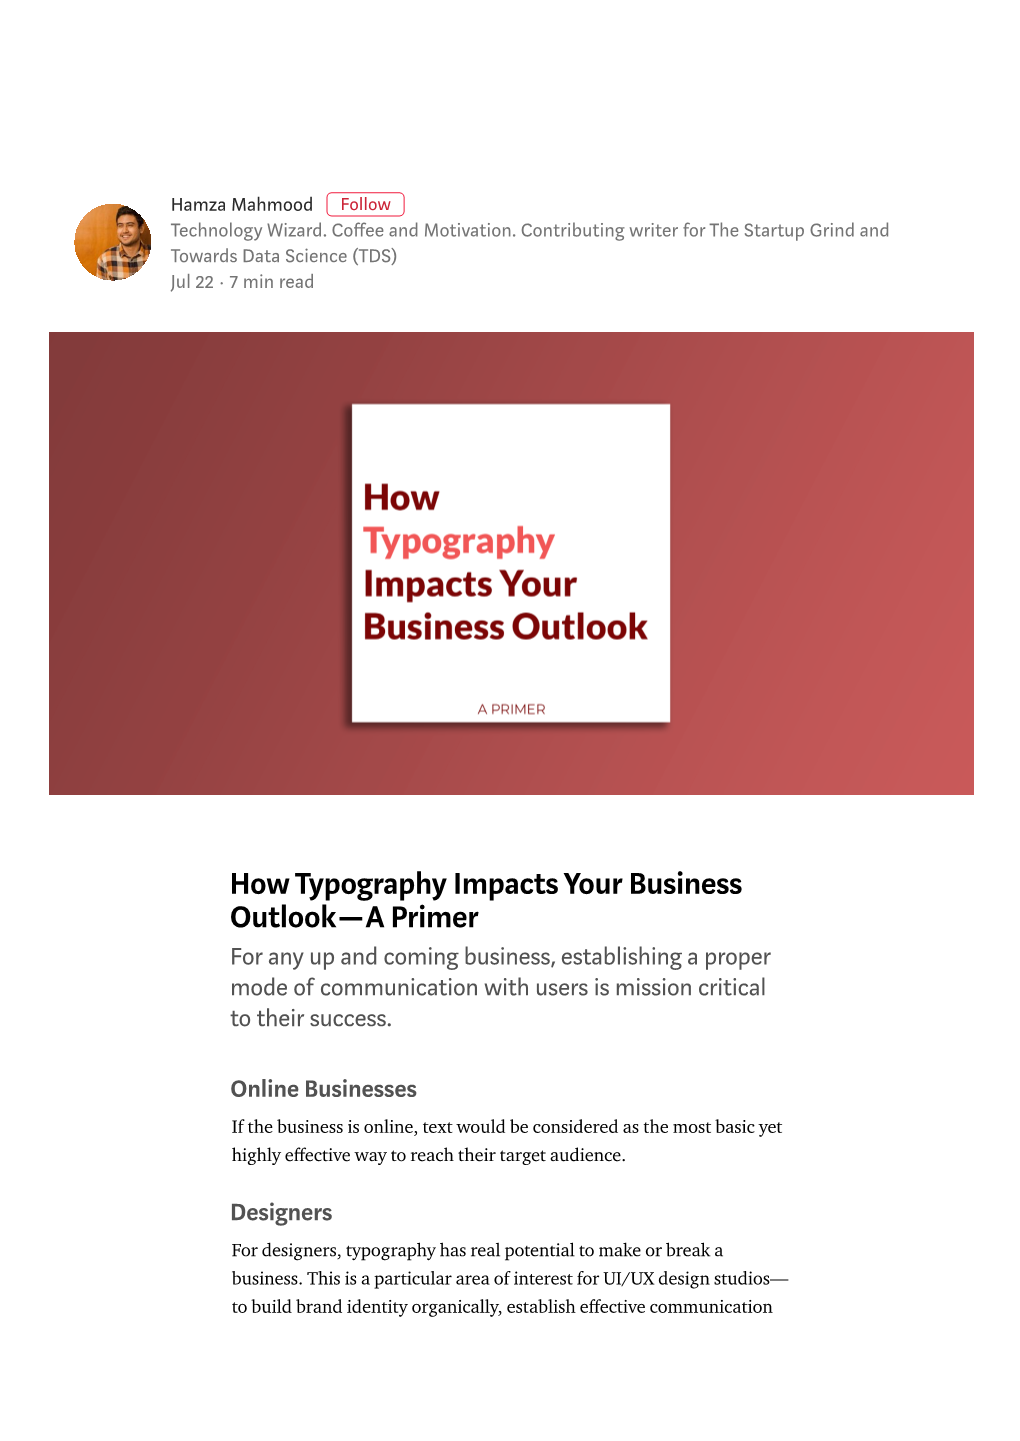 How Typography Impacts Your Business Outlook — a Primer